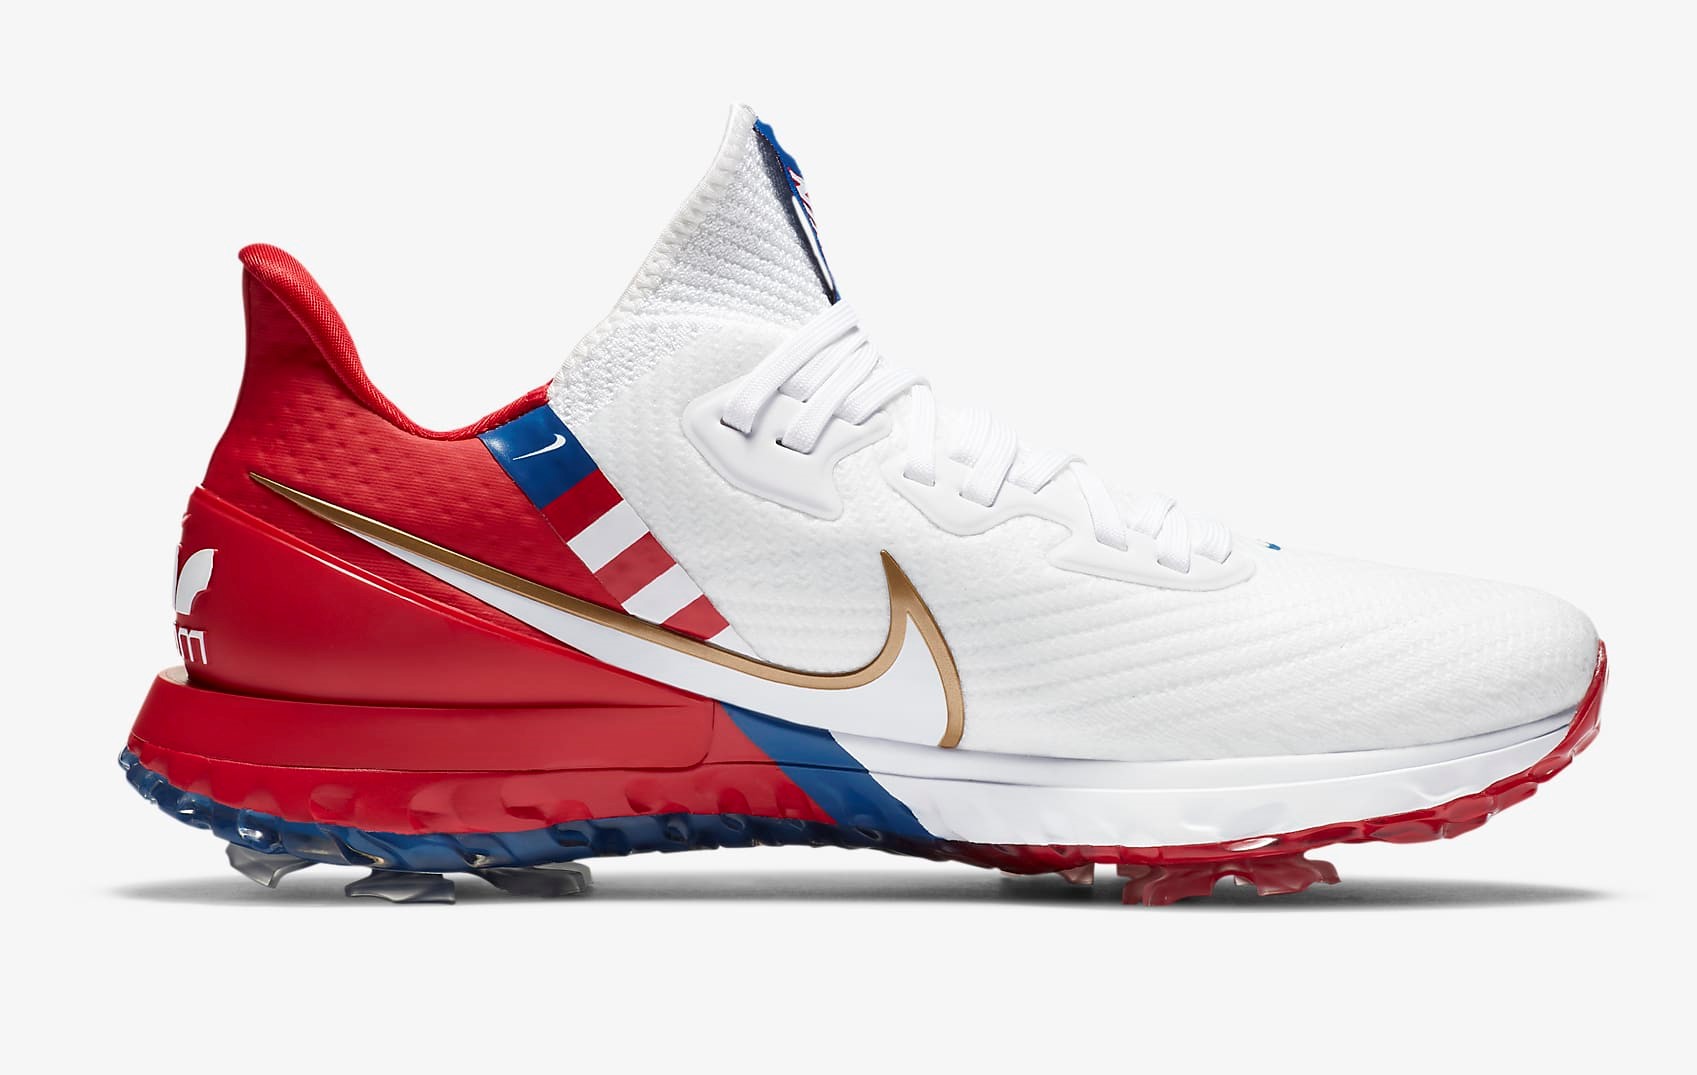 Nike Air Zoom Infinity Tour NRG golf shoes - Ryder Cup models 